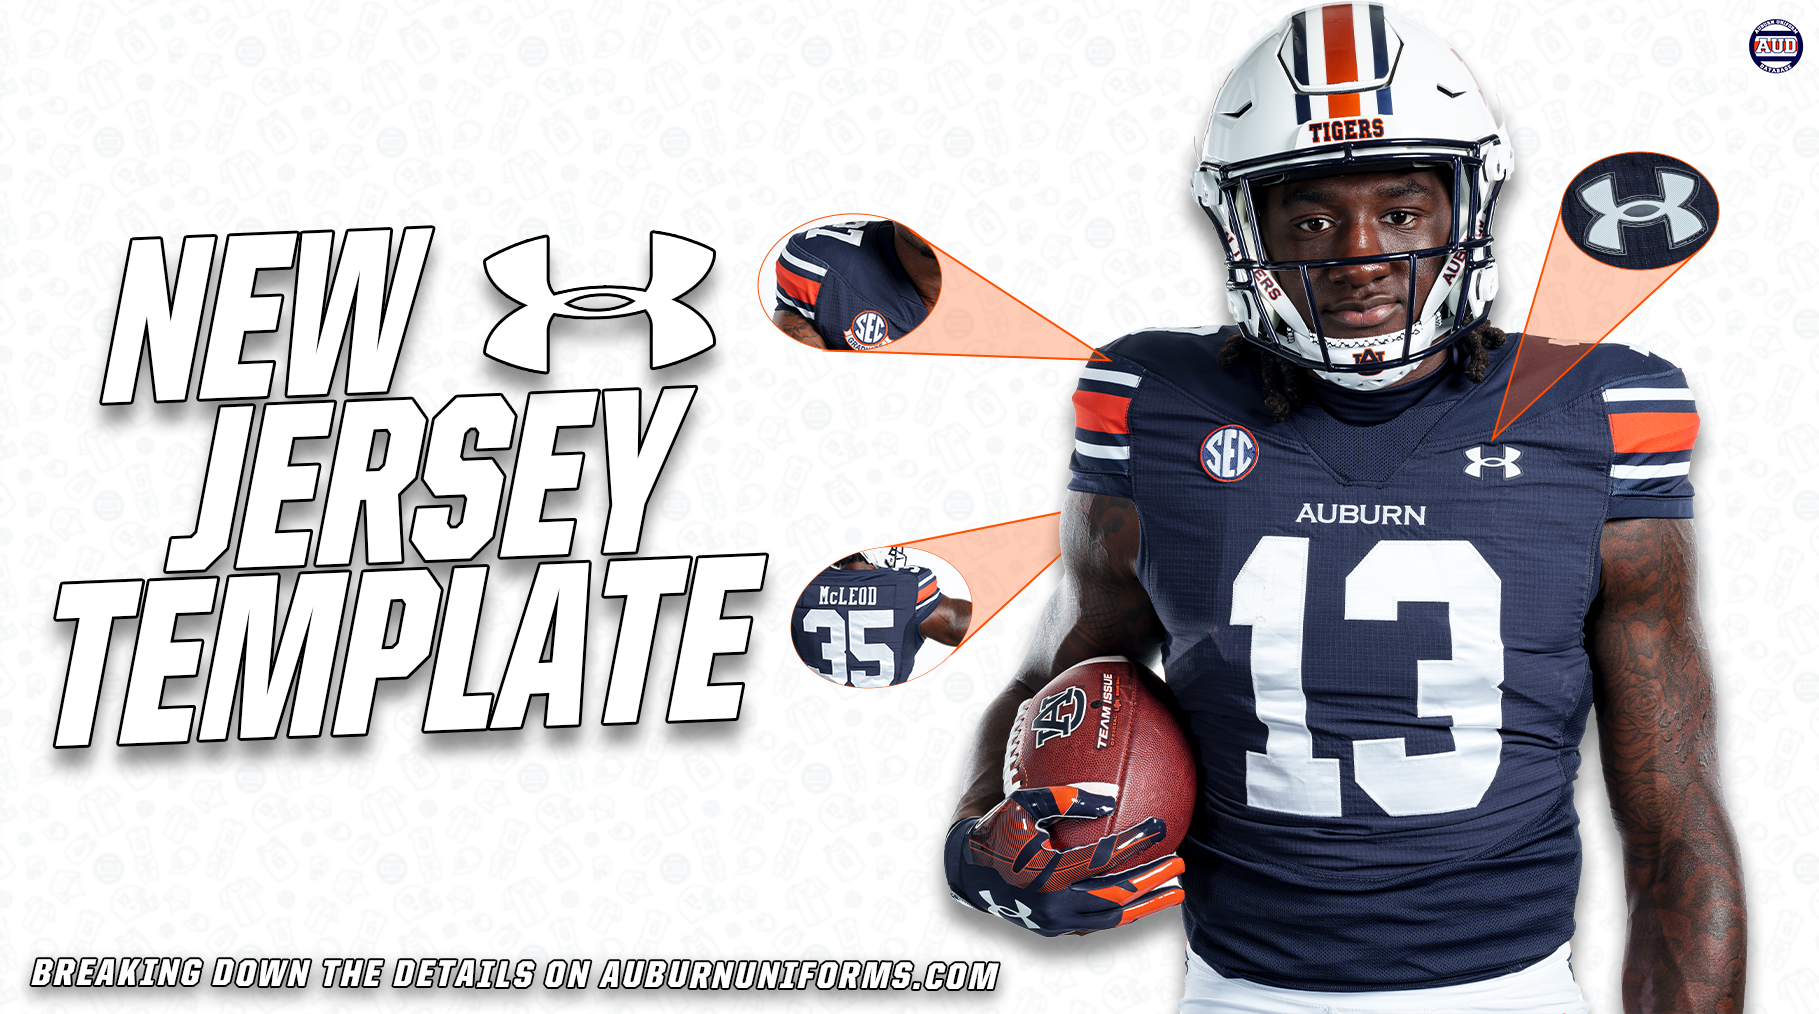 Auburn Tigers Football player Rivaldo Fairweather poses in the new Under Armour template jerseys.